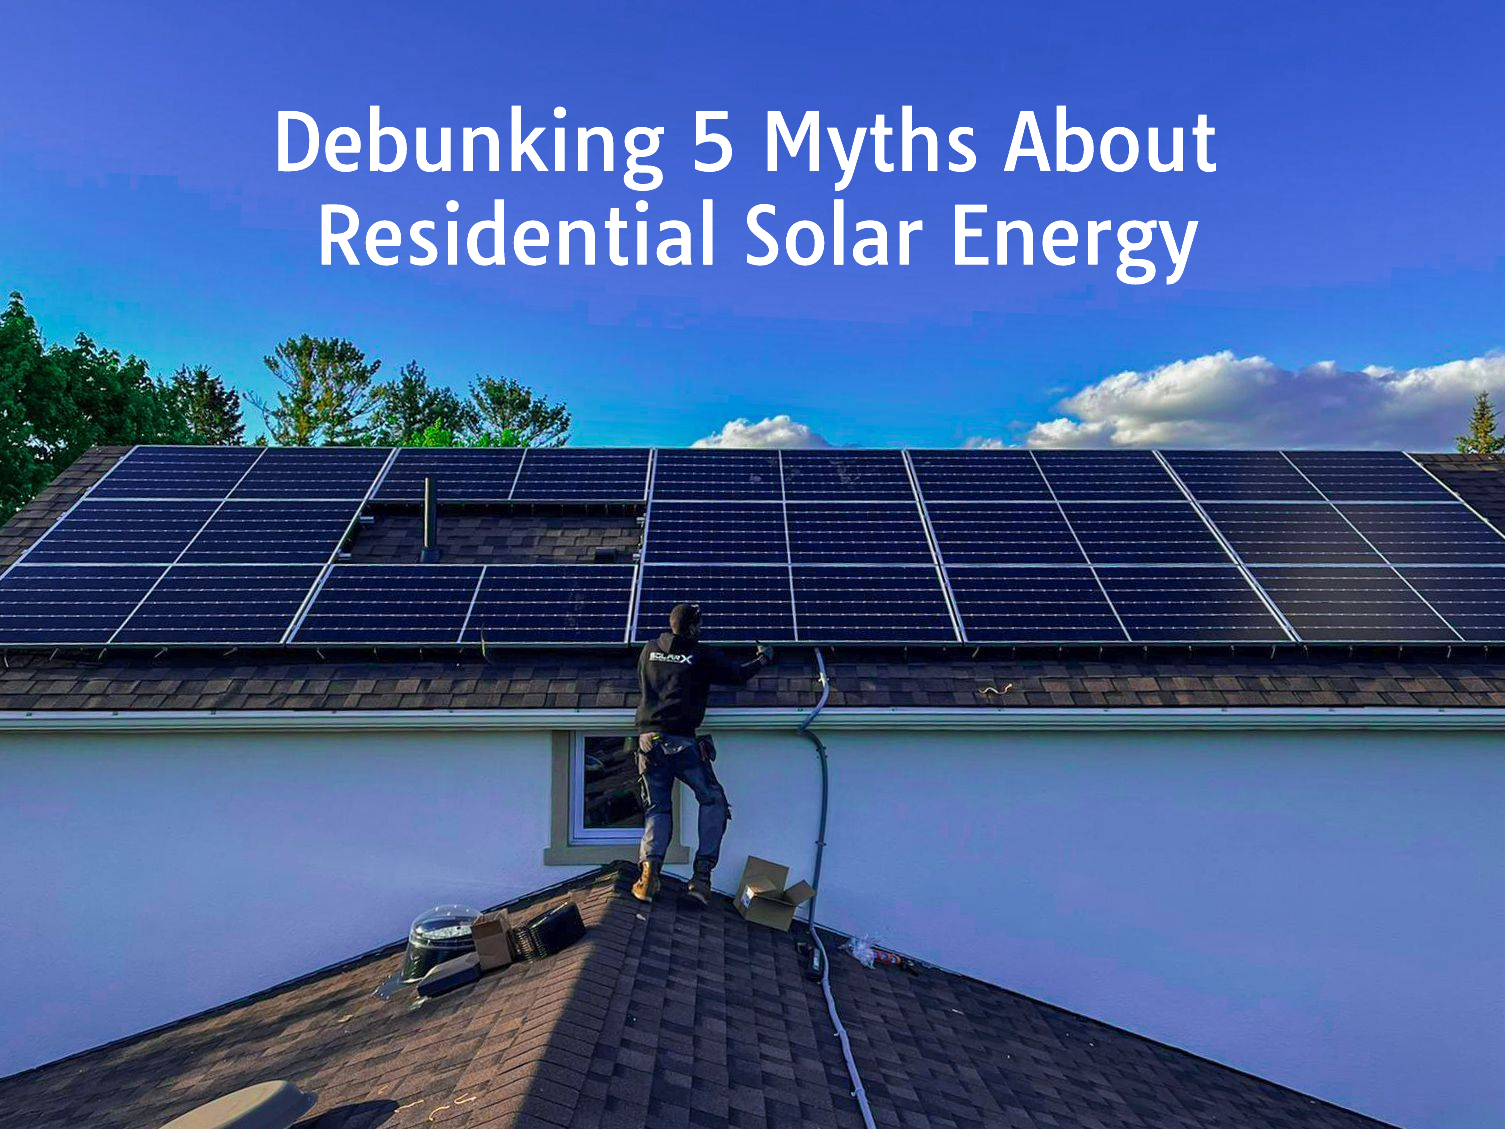 Debunking 5 Myths About Residential Solar Energy